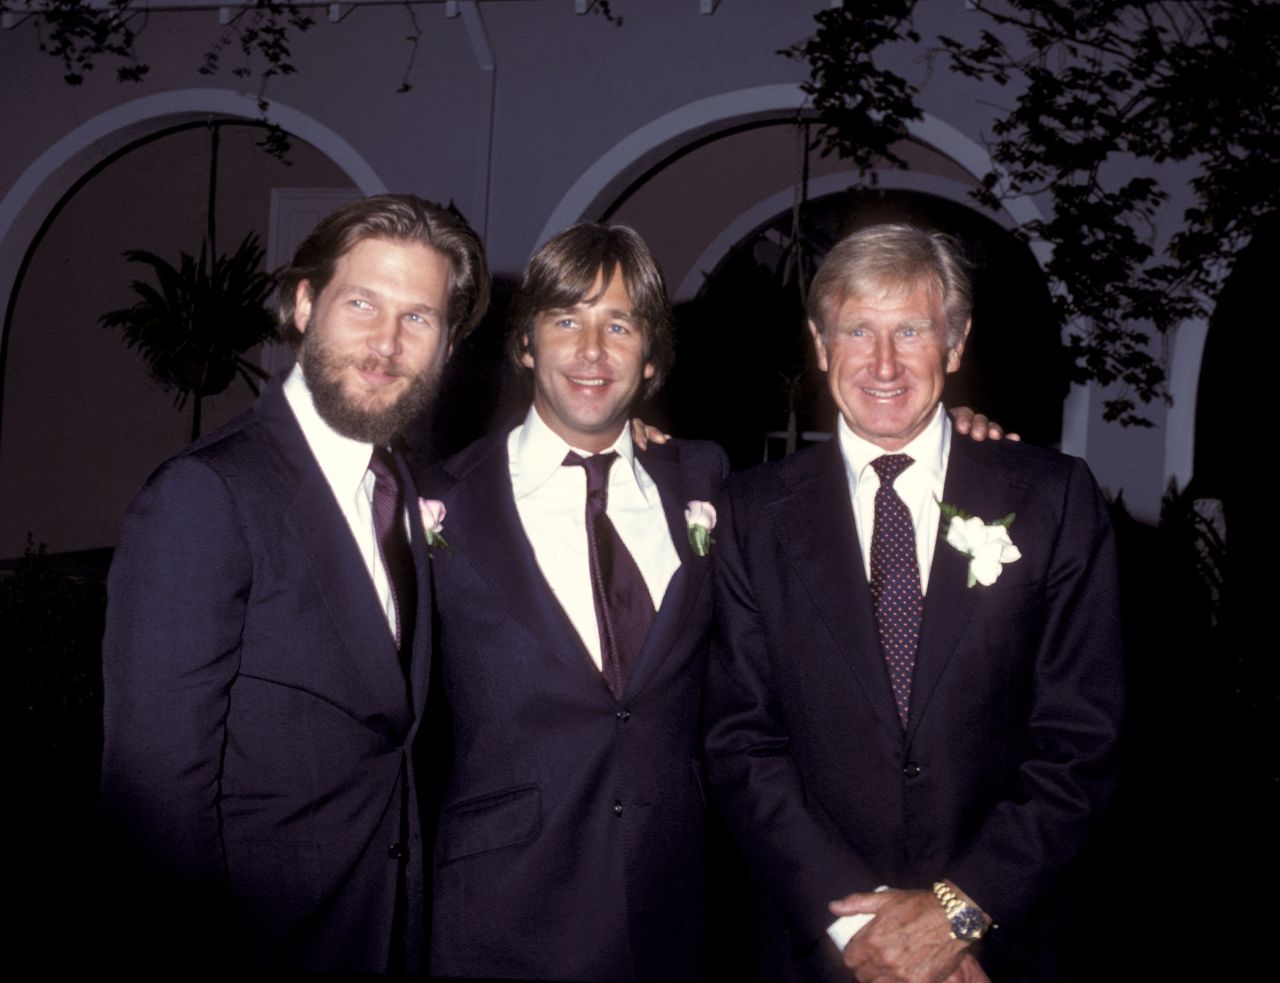 Bridges, left, takes a photo with his brother and his father during his sister Cindy's wedding in 1979.